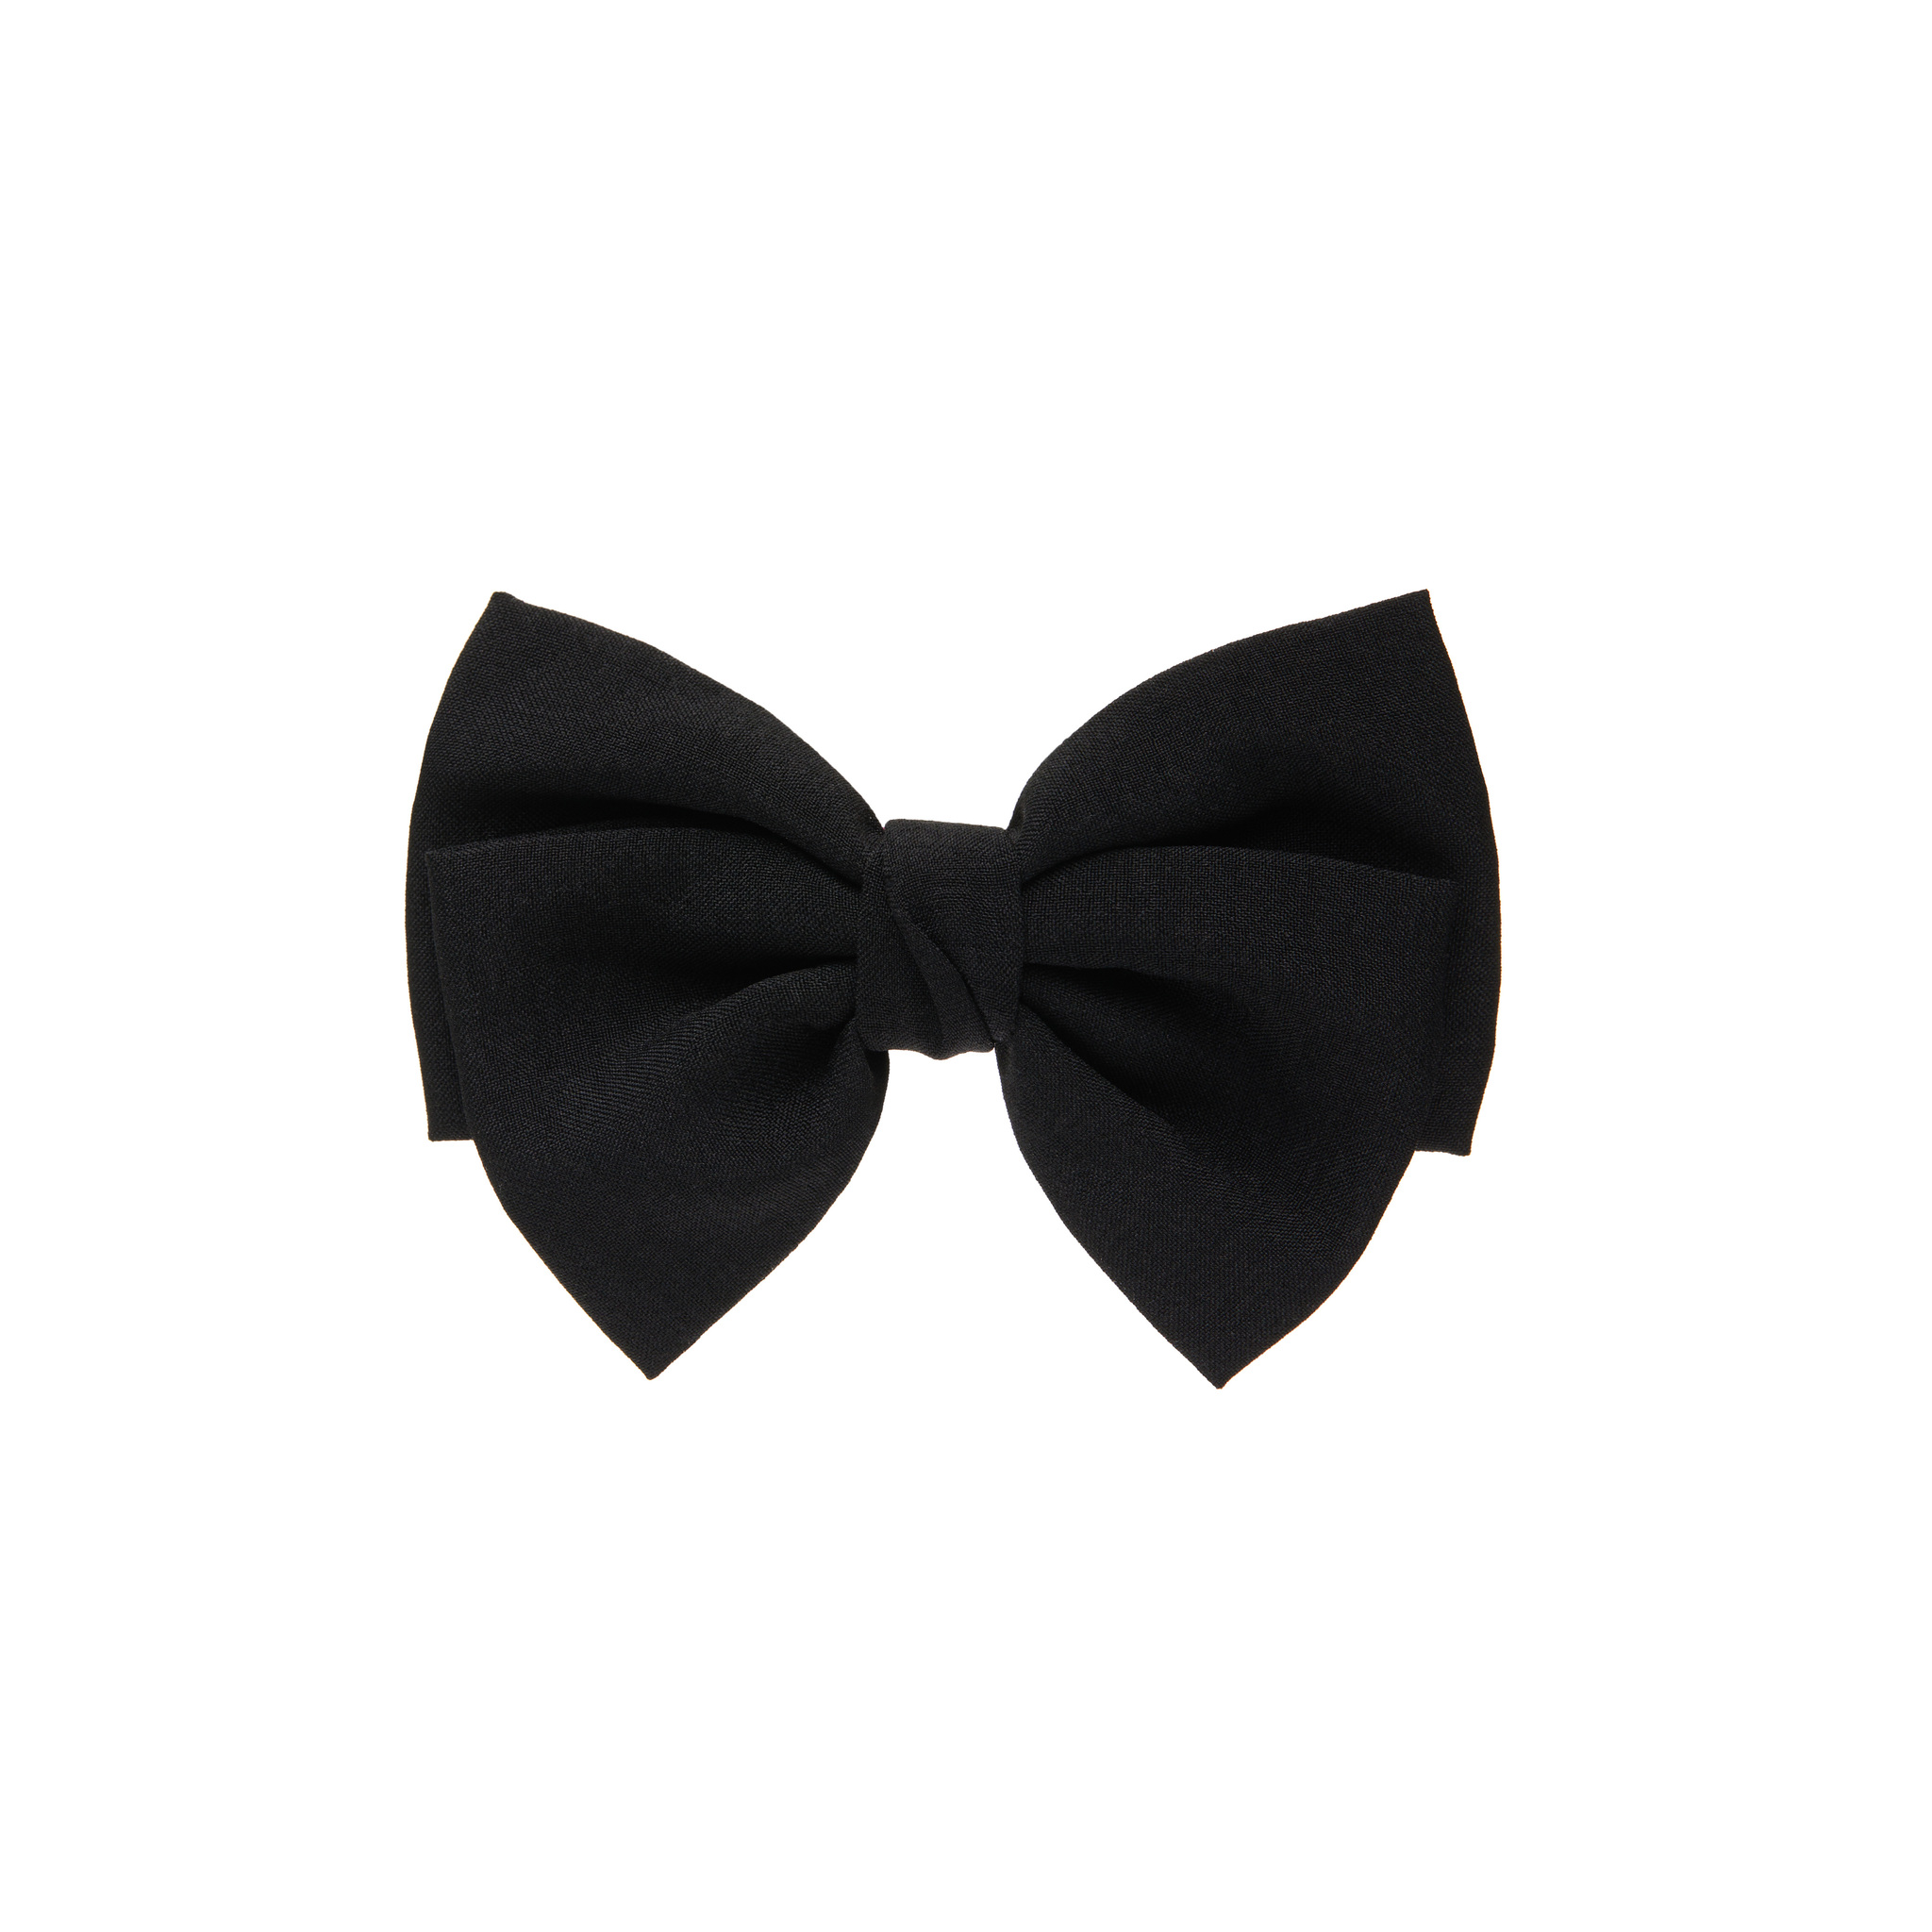 HOLLY JUNE Заколка Bow Hair Clip – Black 1pc satin bow with clip women girls elegant bow tie hairpins vintage barrette bow hair clip prom headwear hair accessories party